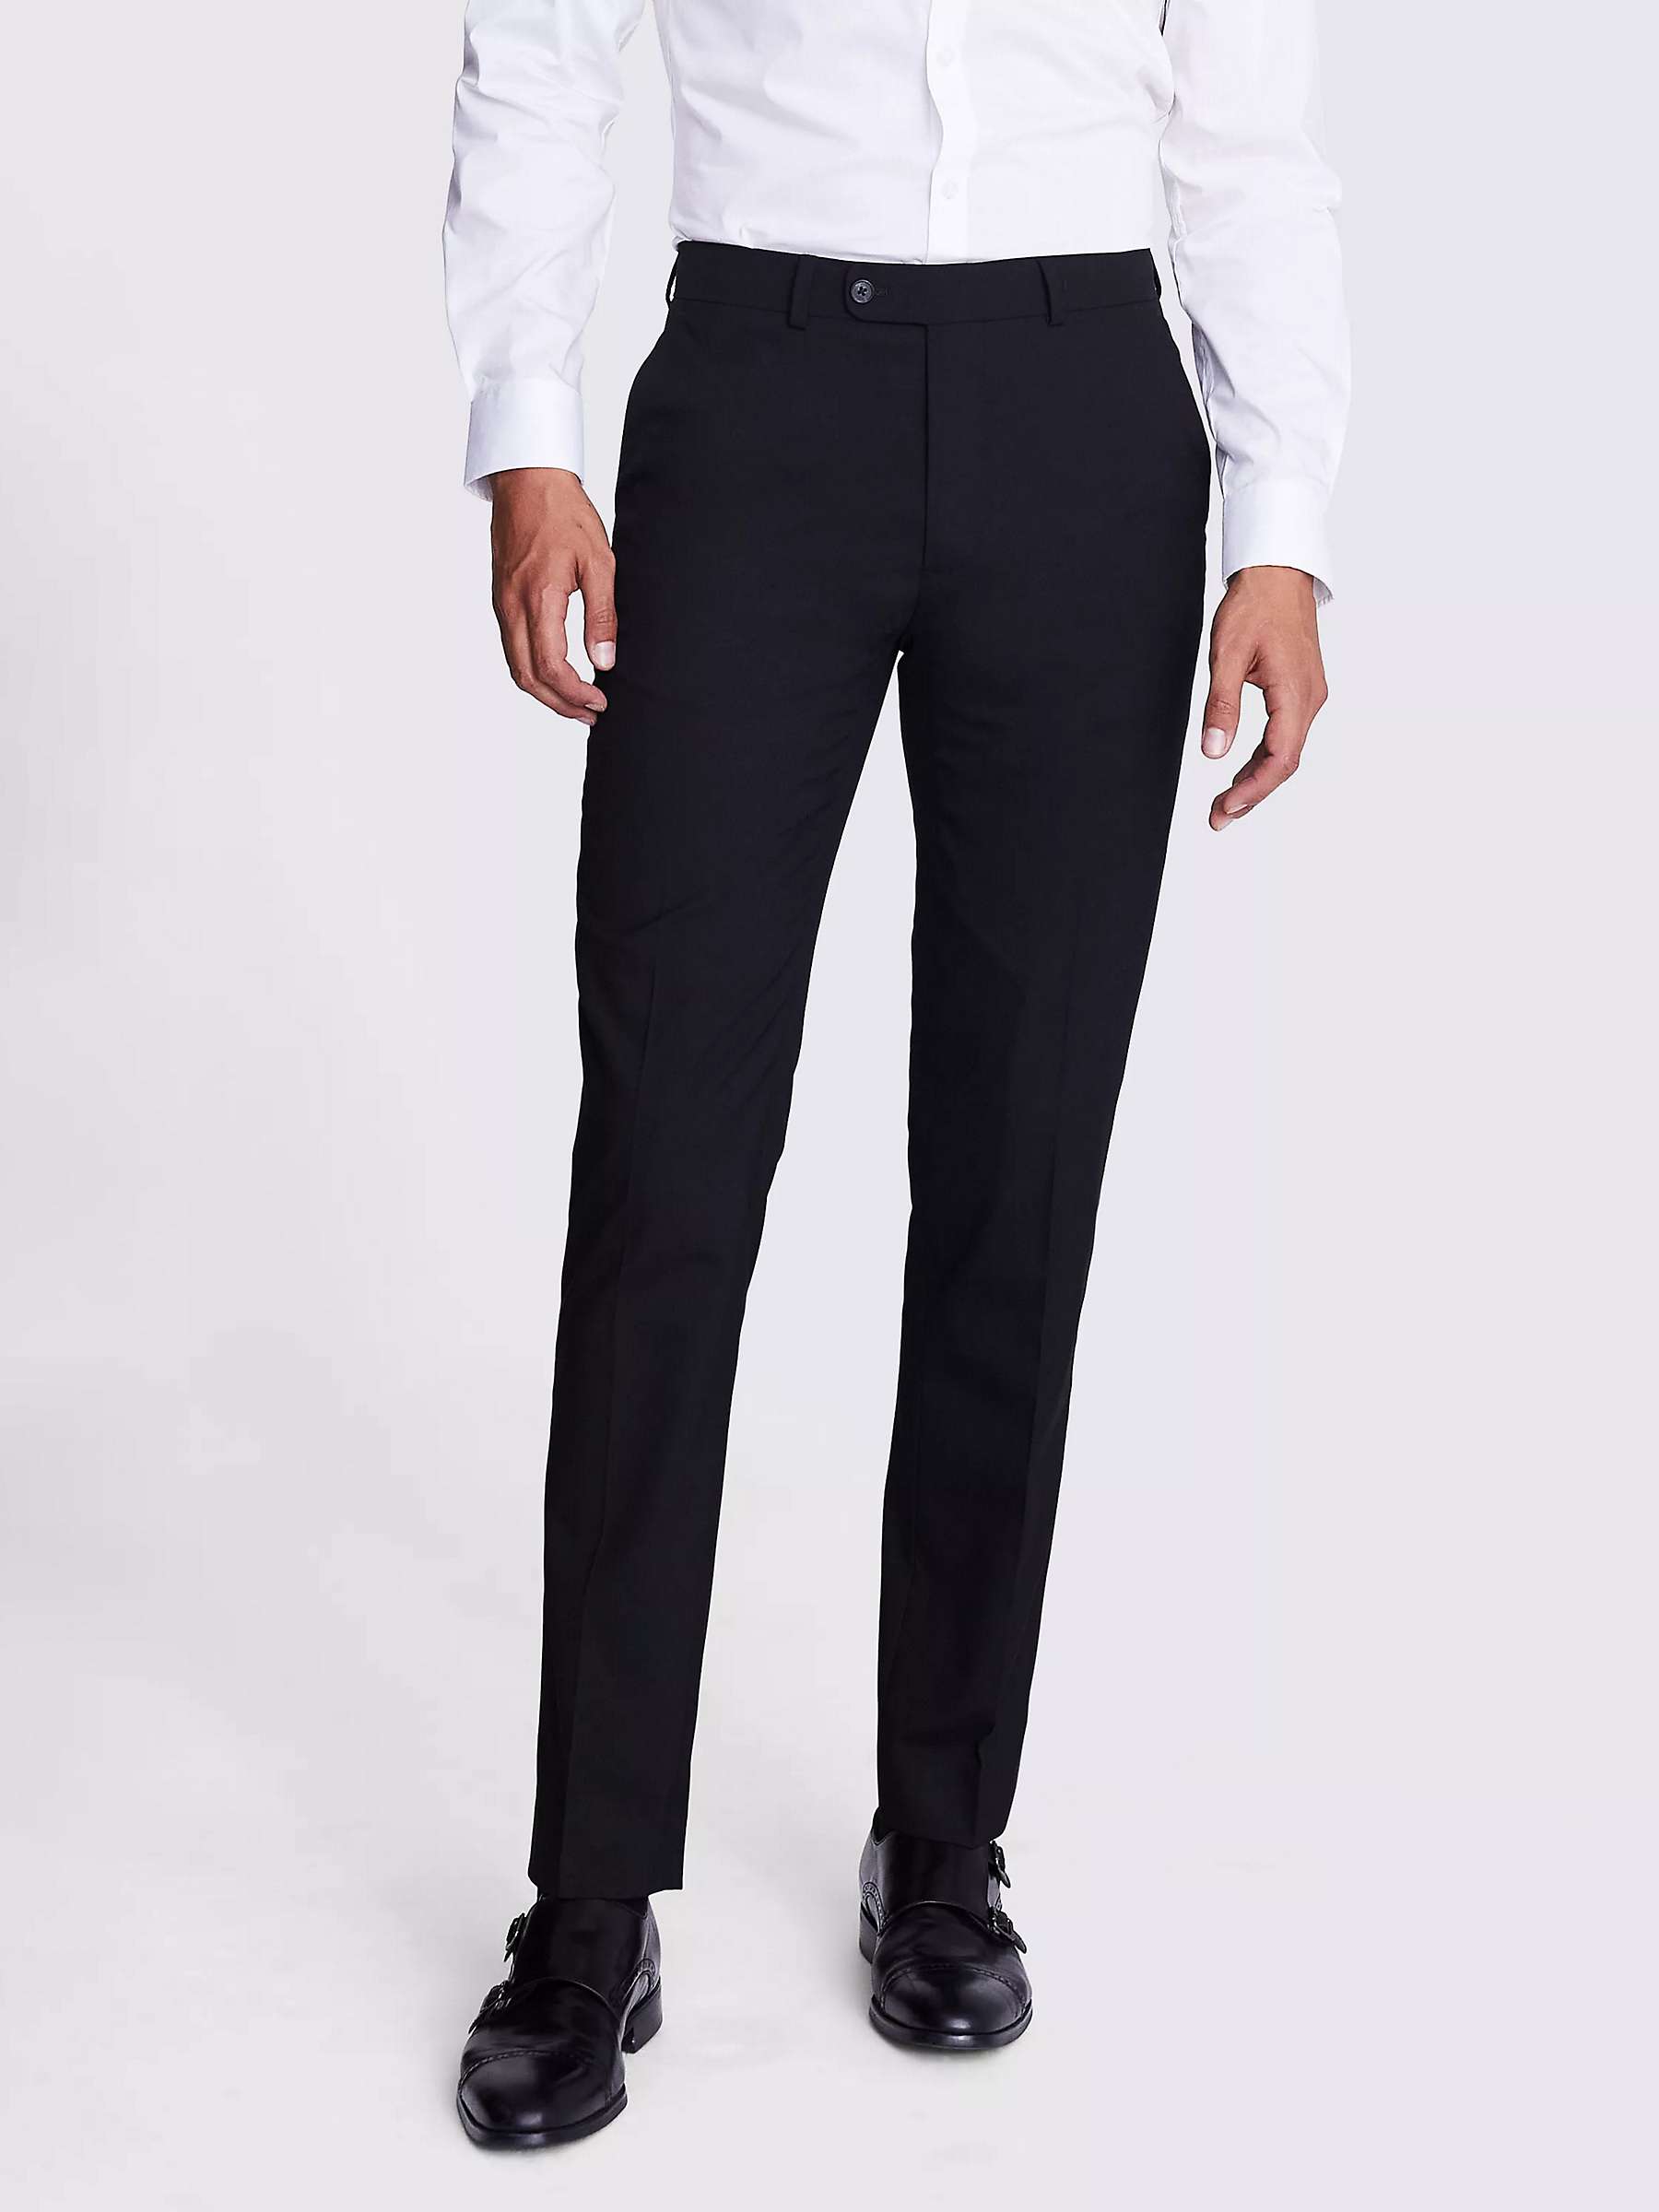 Moss Tailored Fit Trousers, Black at John Lewis & Partners